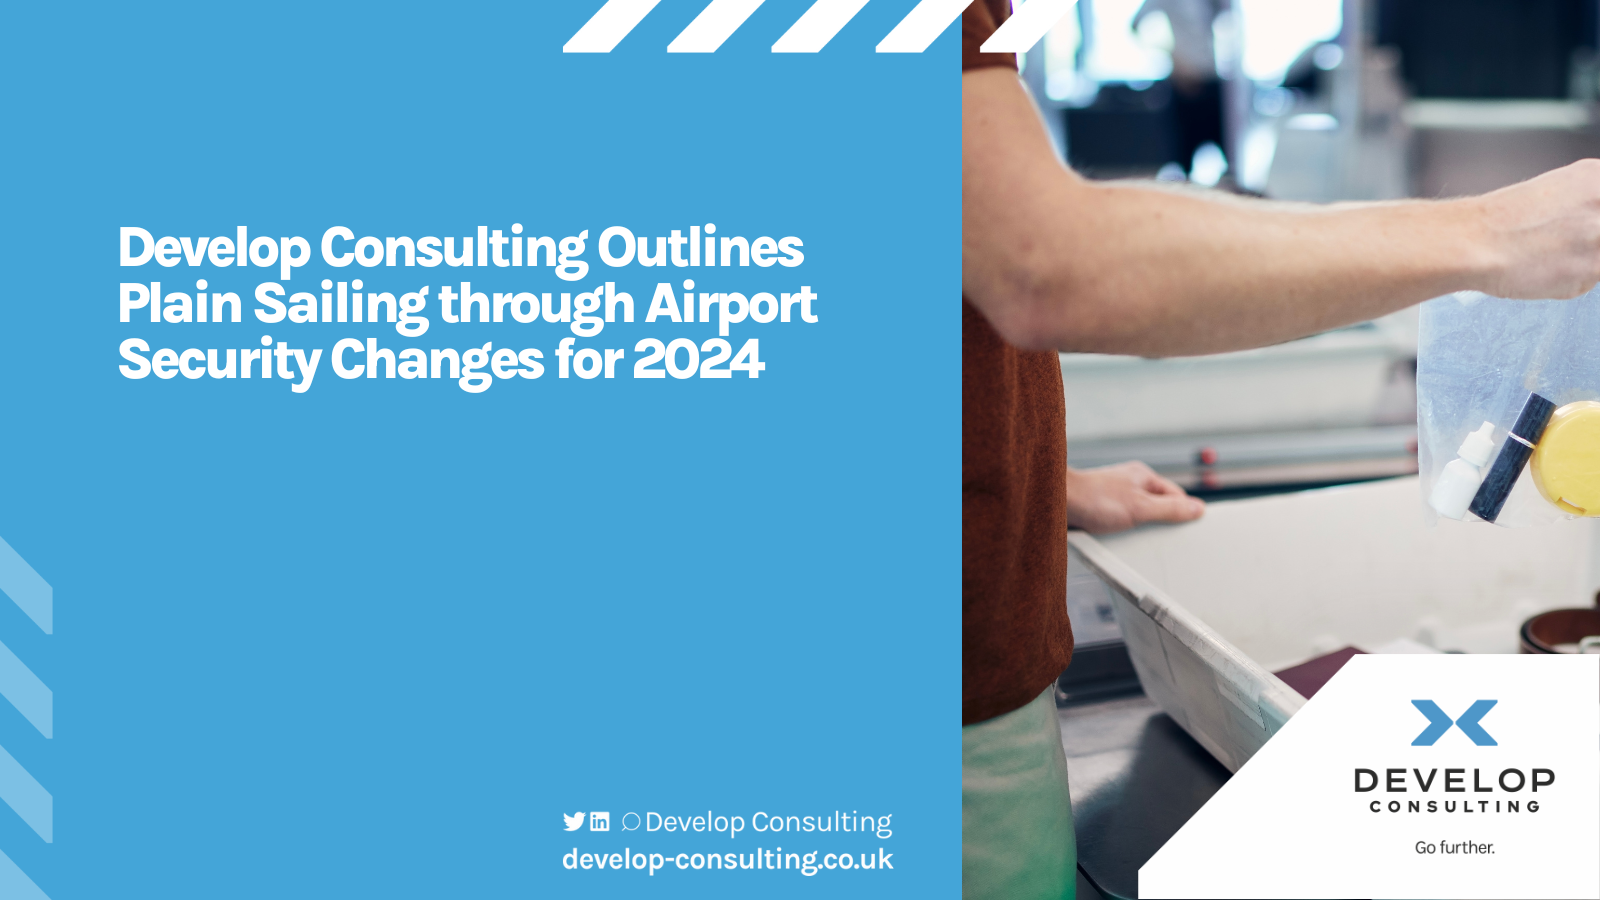 Airports face security changes in 2024